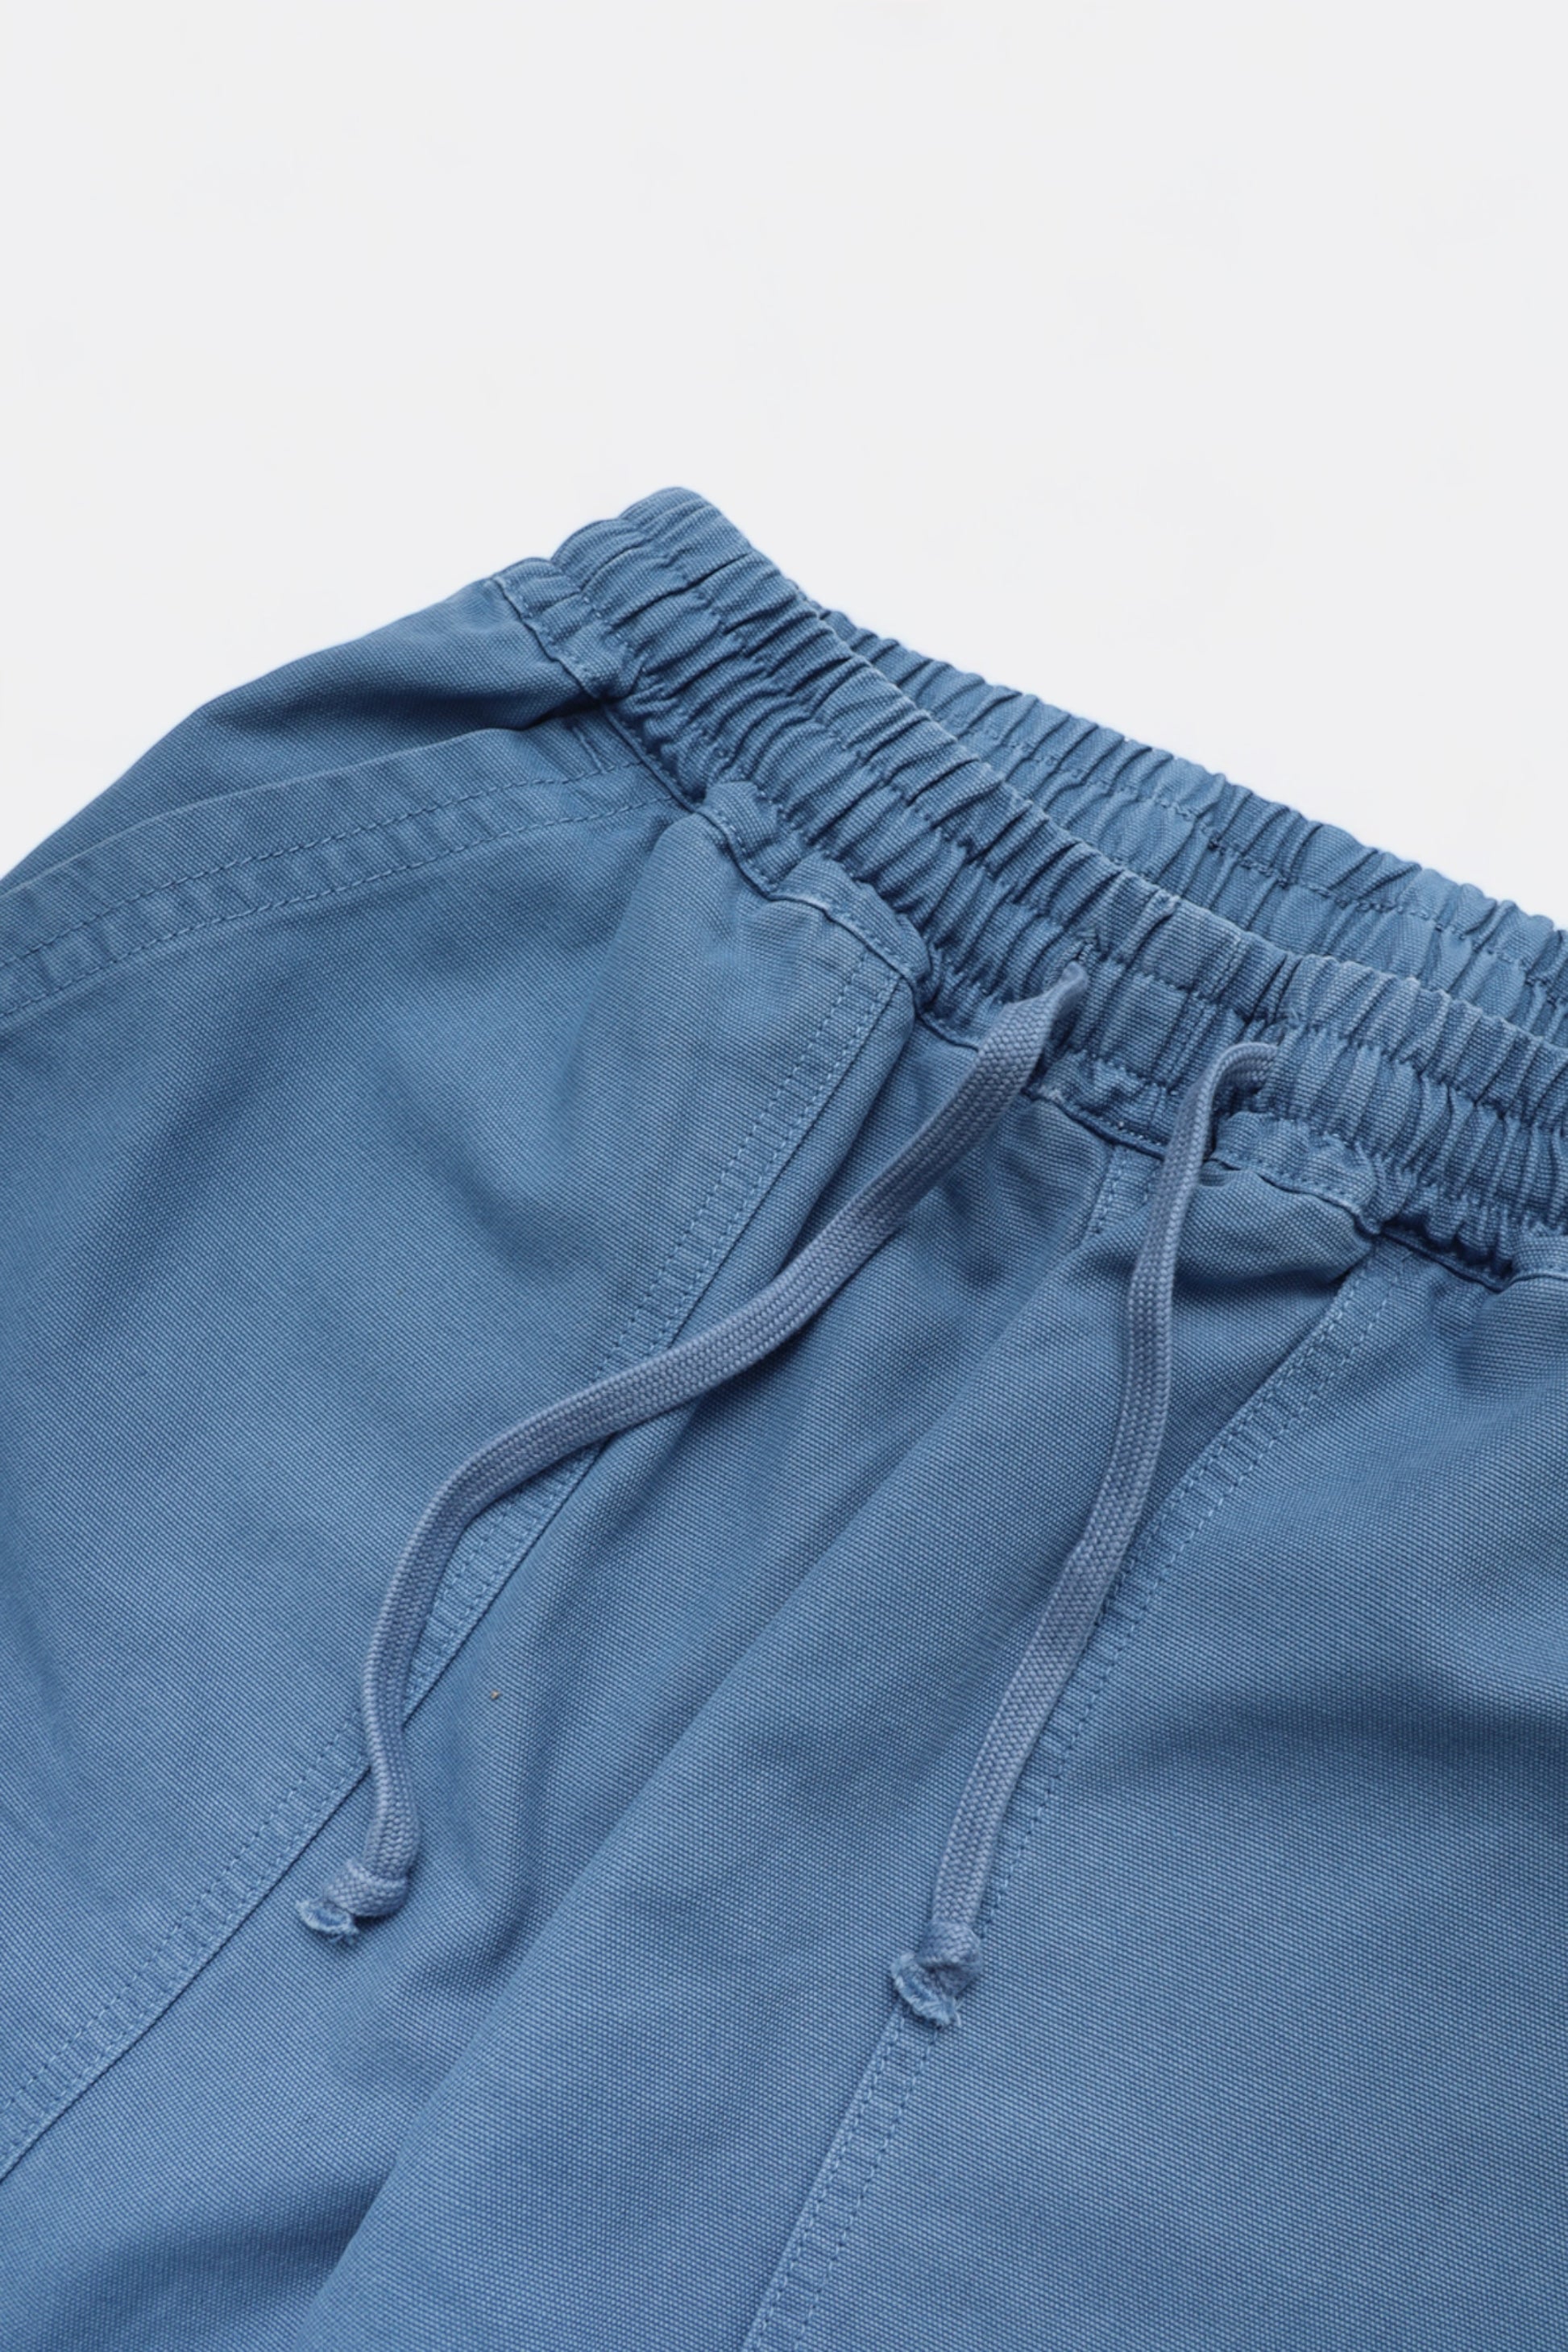 Service Works - Classic Chef Pants (Work Blue)